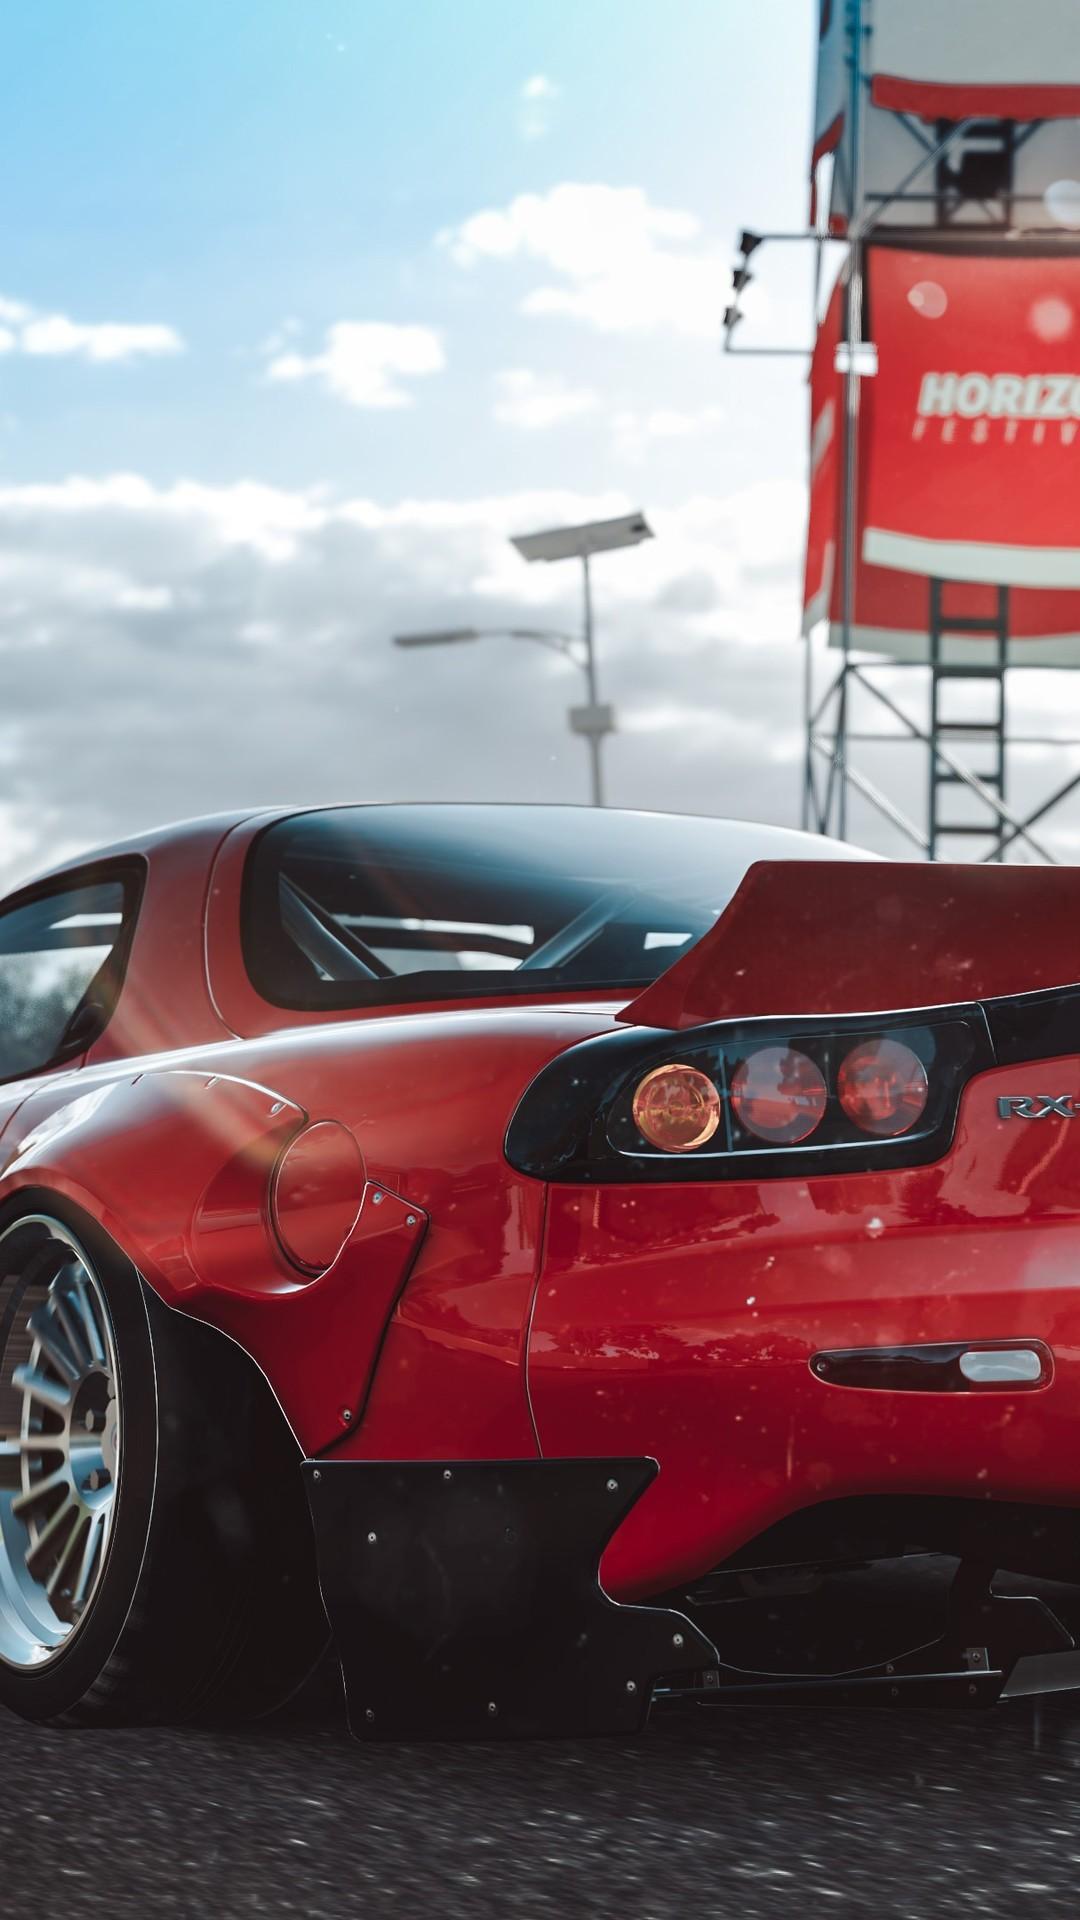 Rx7 Hd Wallpaper For Android Apk Download